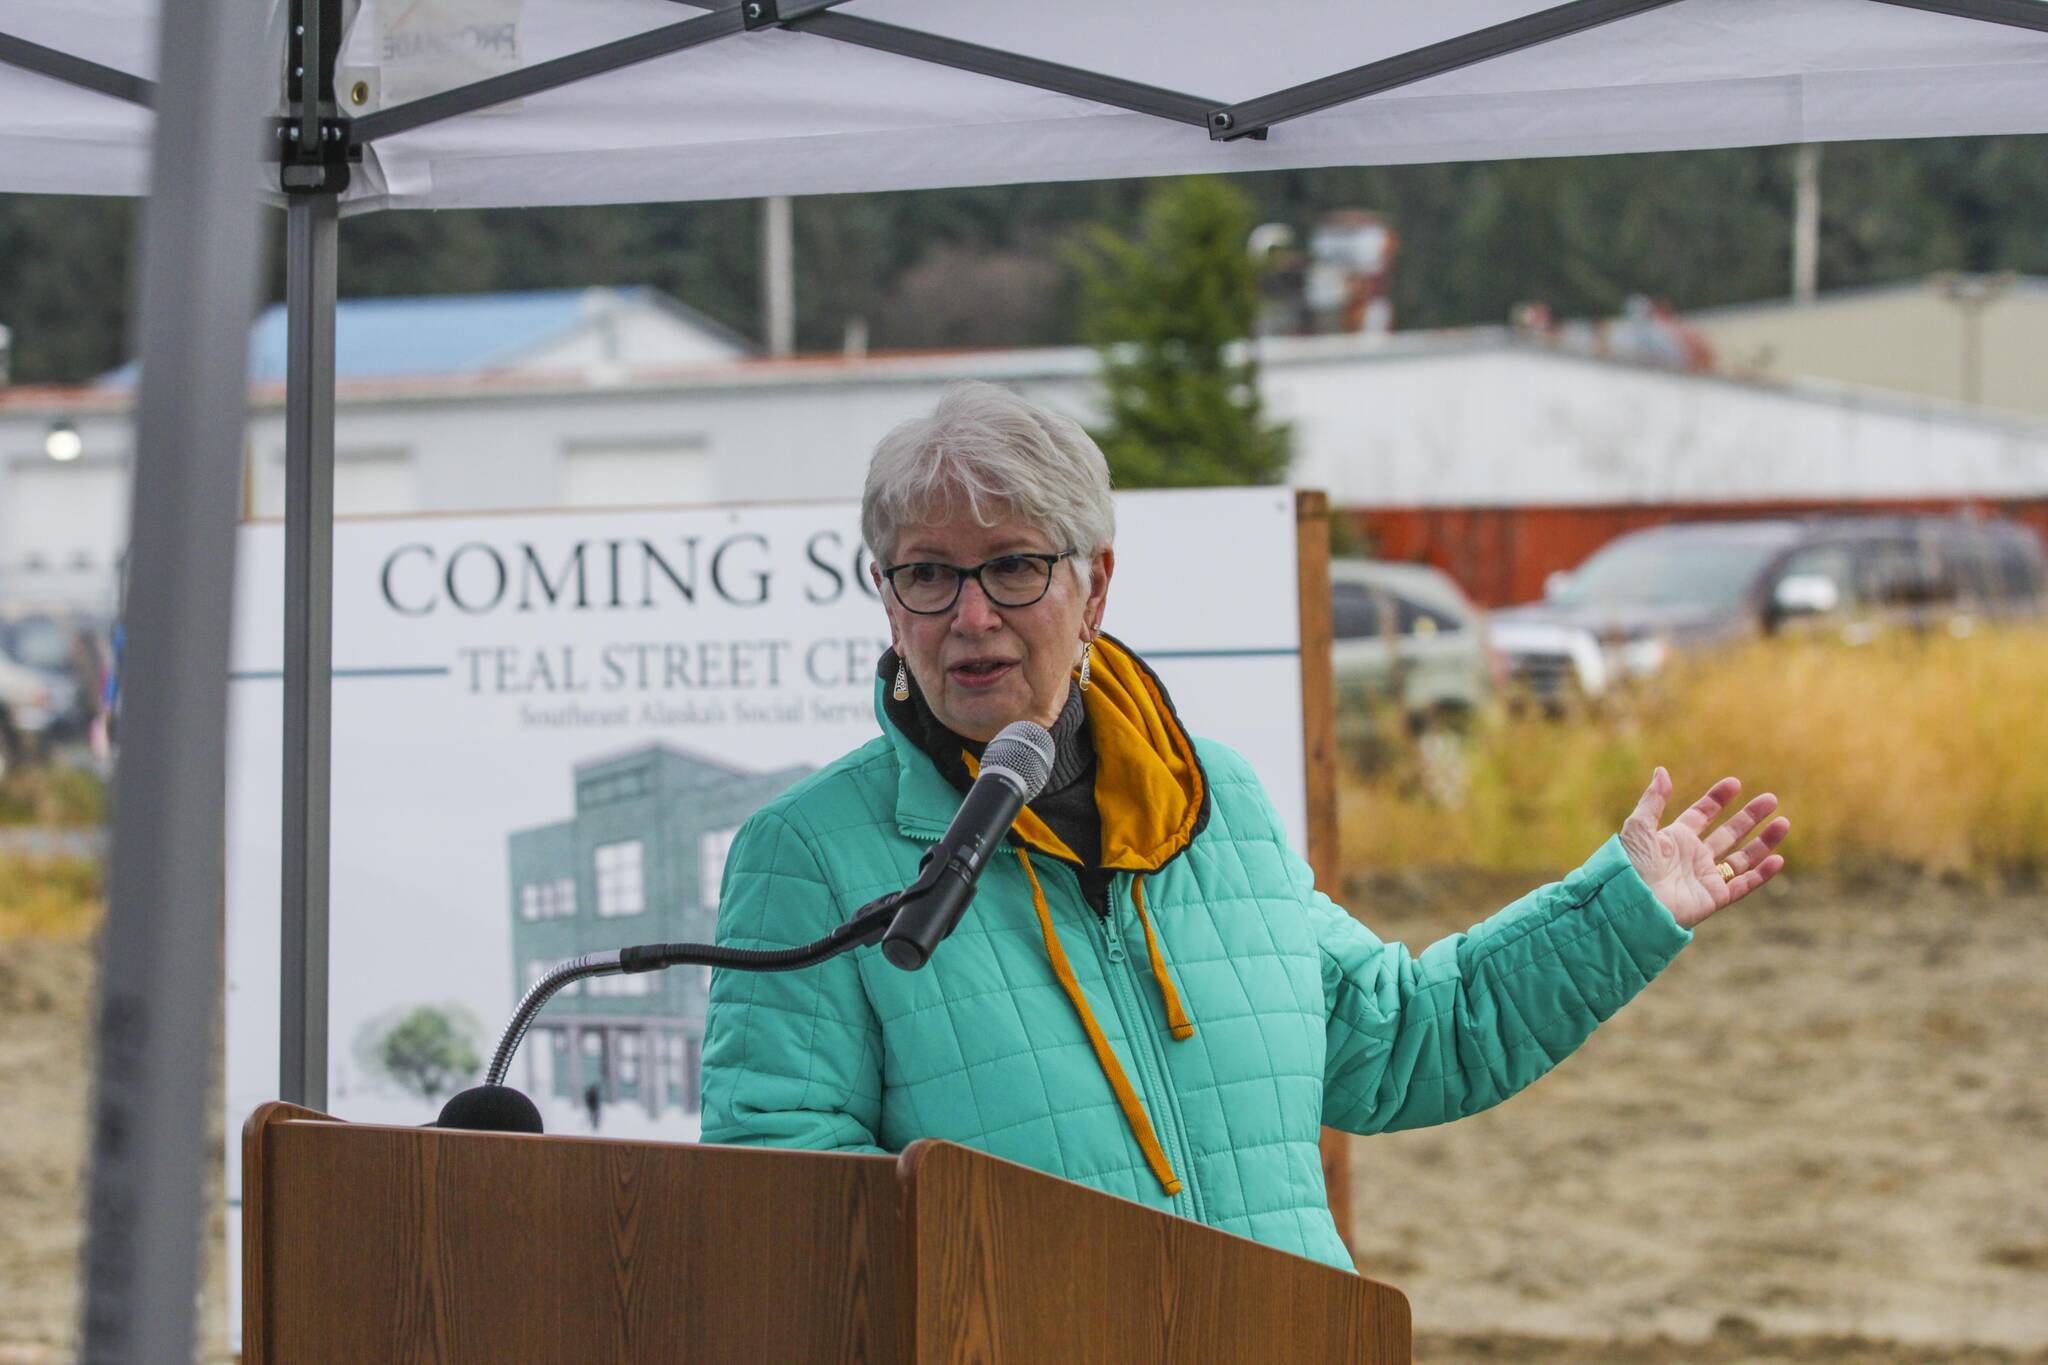 Chair of the Teal Street Center Campaign Committee Sioux Douglas speaks during the groundbreaking ceremony for the Teal Street Center, a multi-tenant building housing a number of nonprofit and tribal services for Southeast residents next to the Glory Hall on Nov. 2, 2021. Douglas was recently named Philanthropist of the Year award during the Juneau Community Foundation’s annual Philanthropy recognition event. (Michael S. Lockett / Juneau Empire File)